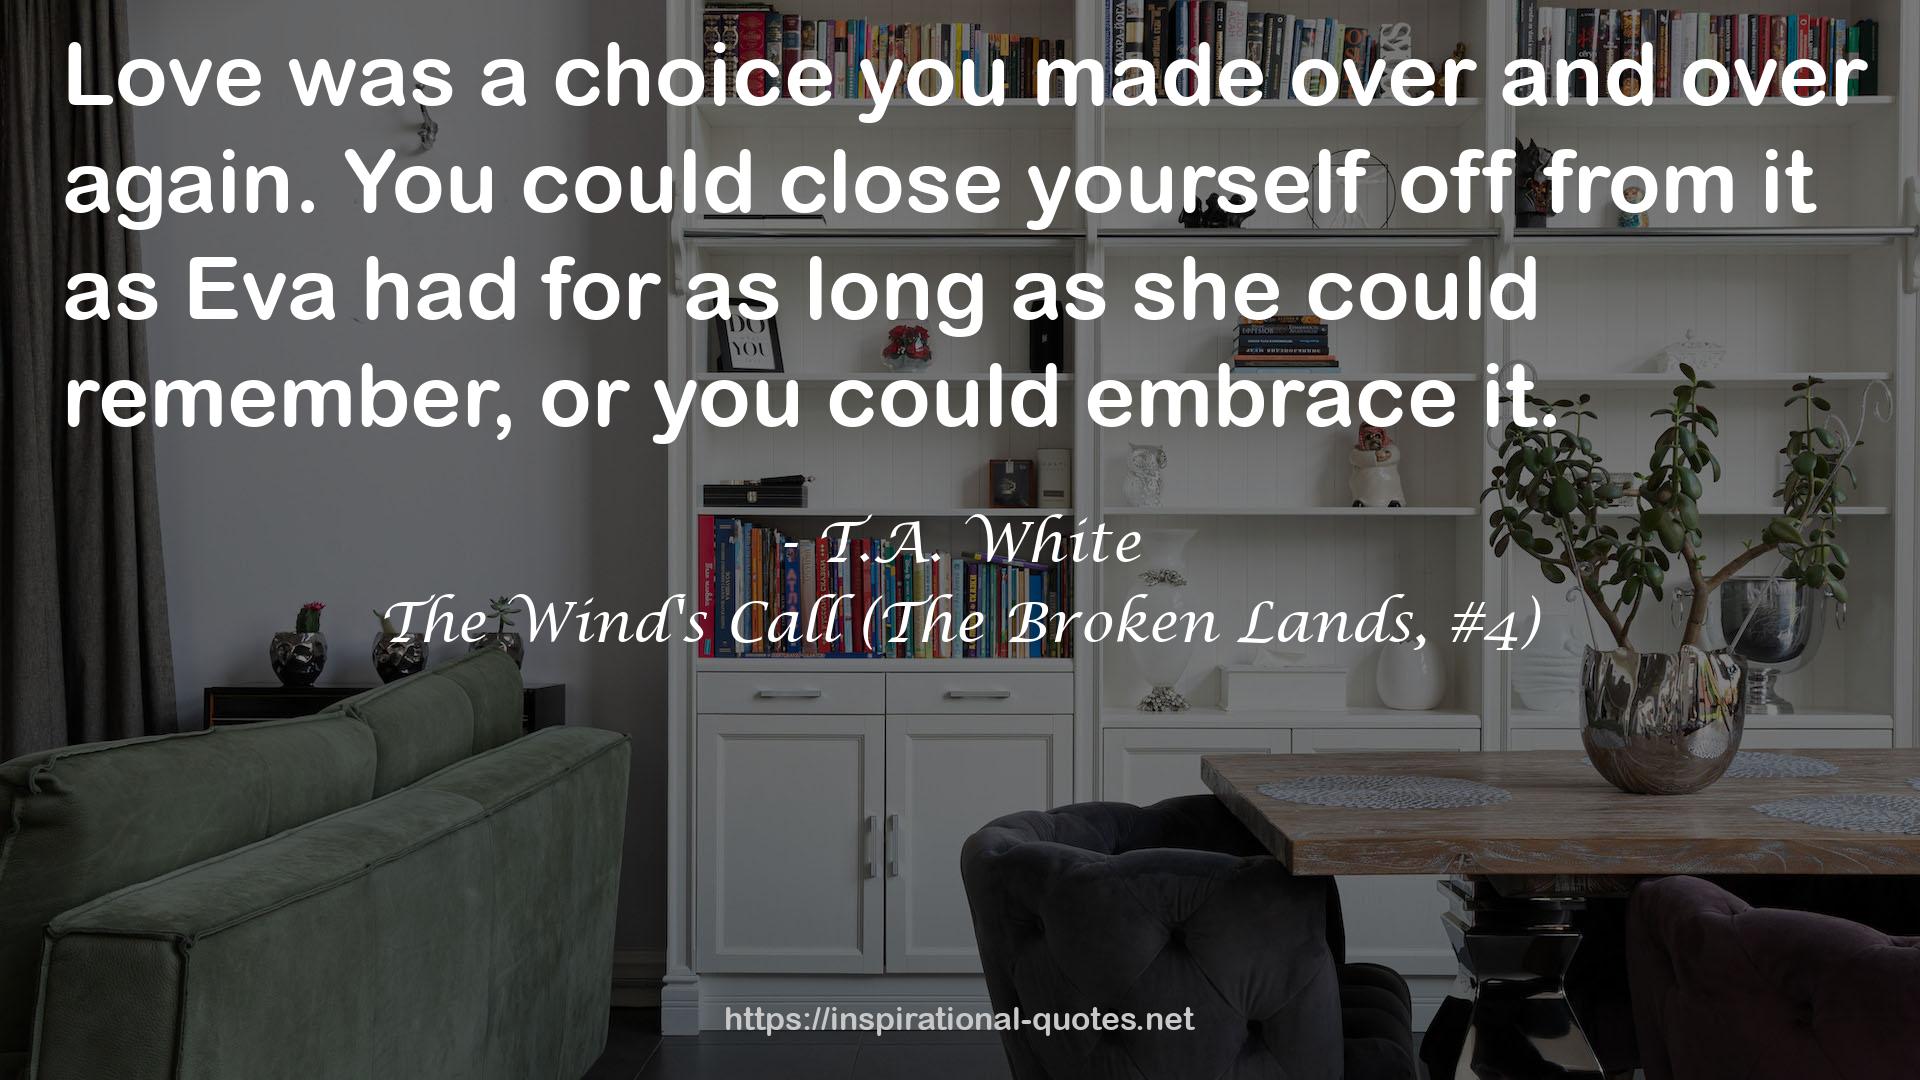 The Wind's Call (The Broken Lands, #4) QUOTES